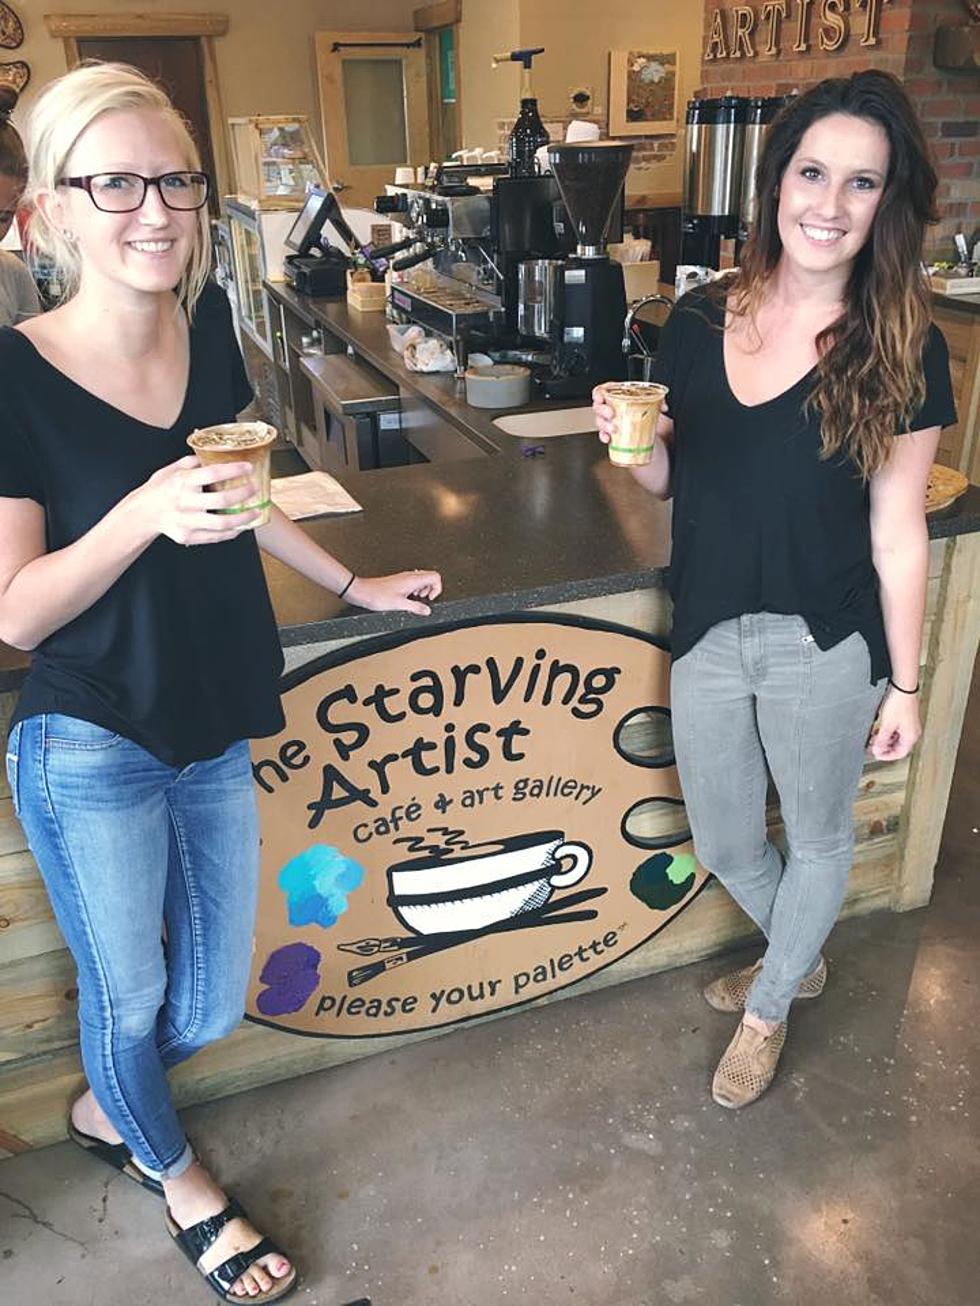 The Starving Artist Cafe in Missoula has Permanently Closed